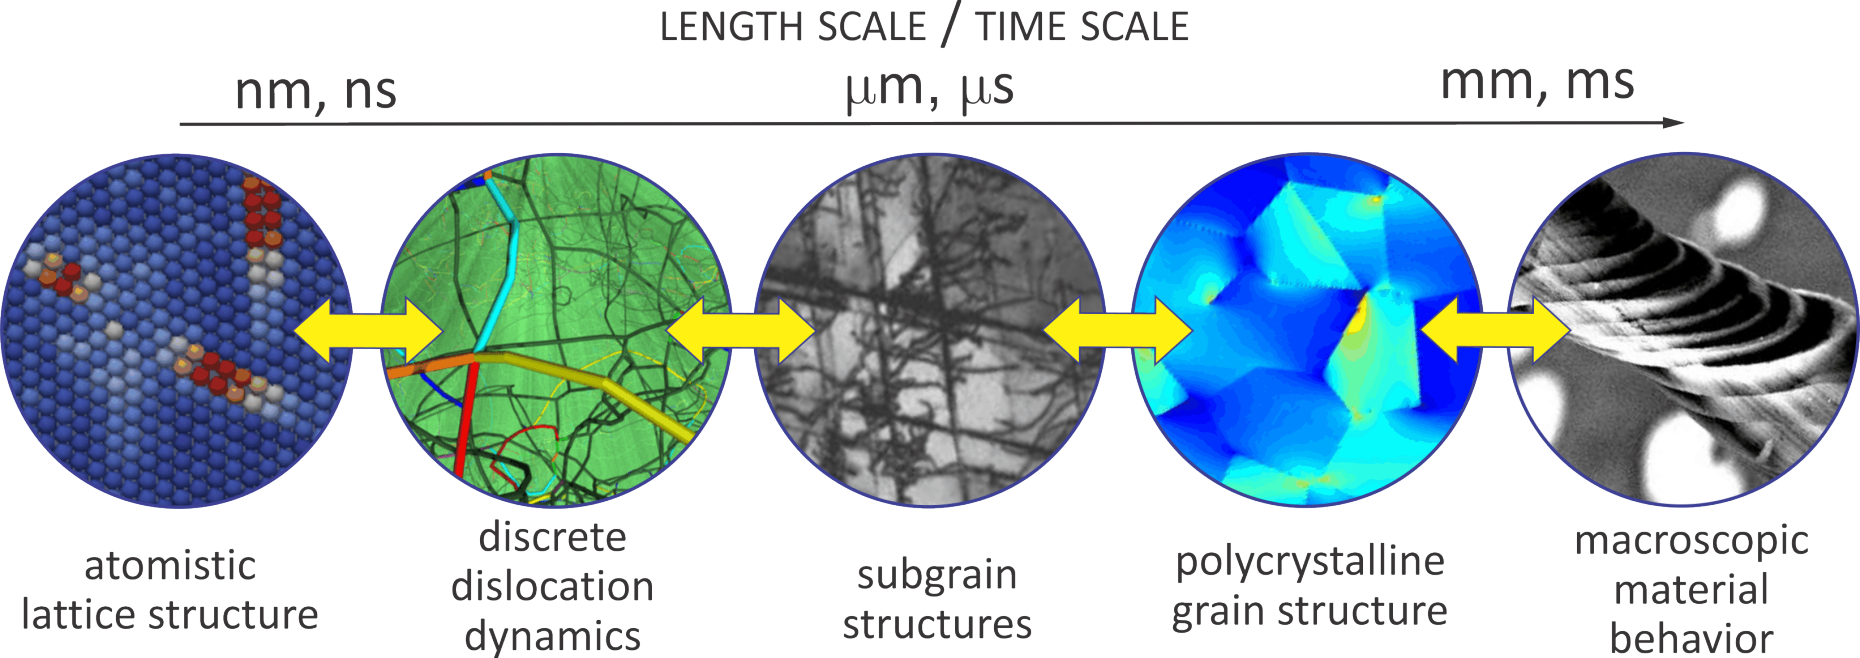 Length and Time Scales